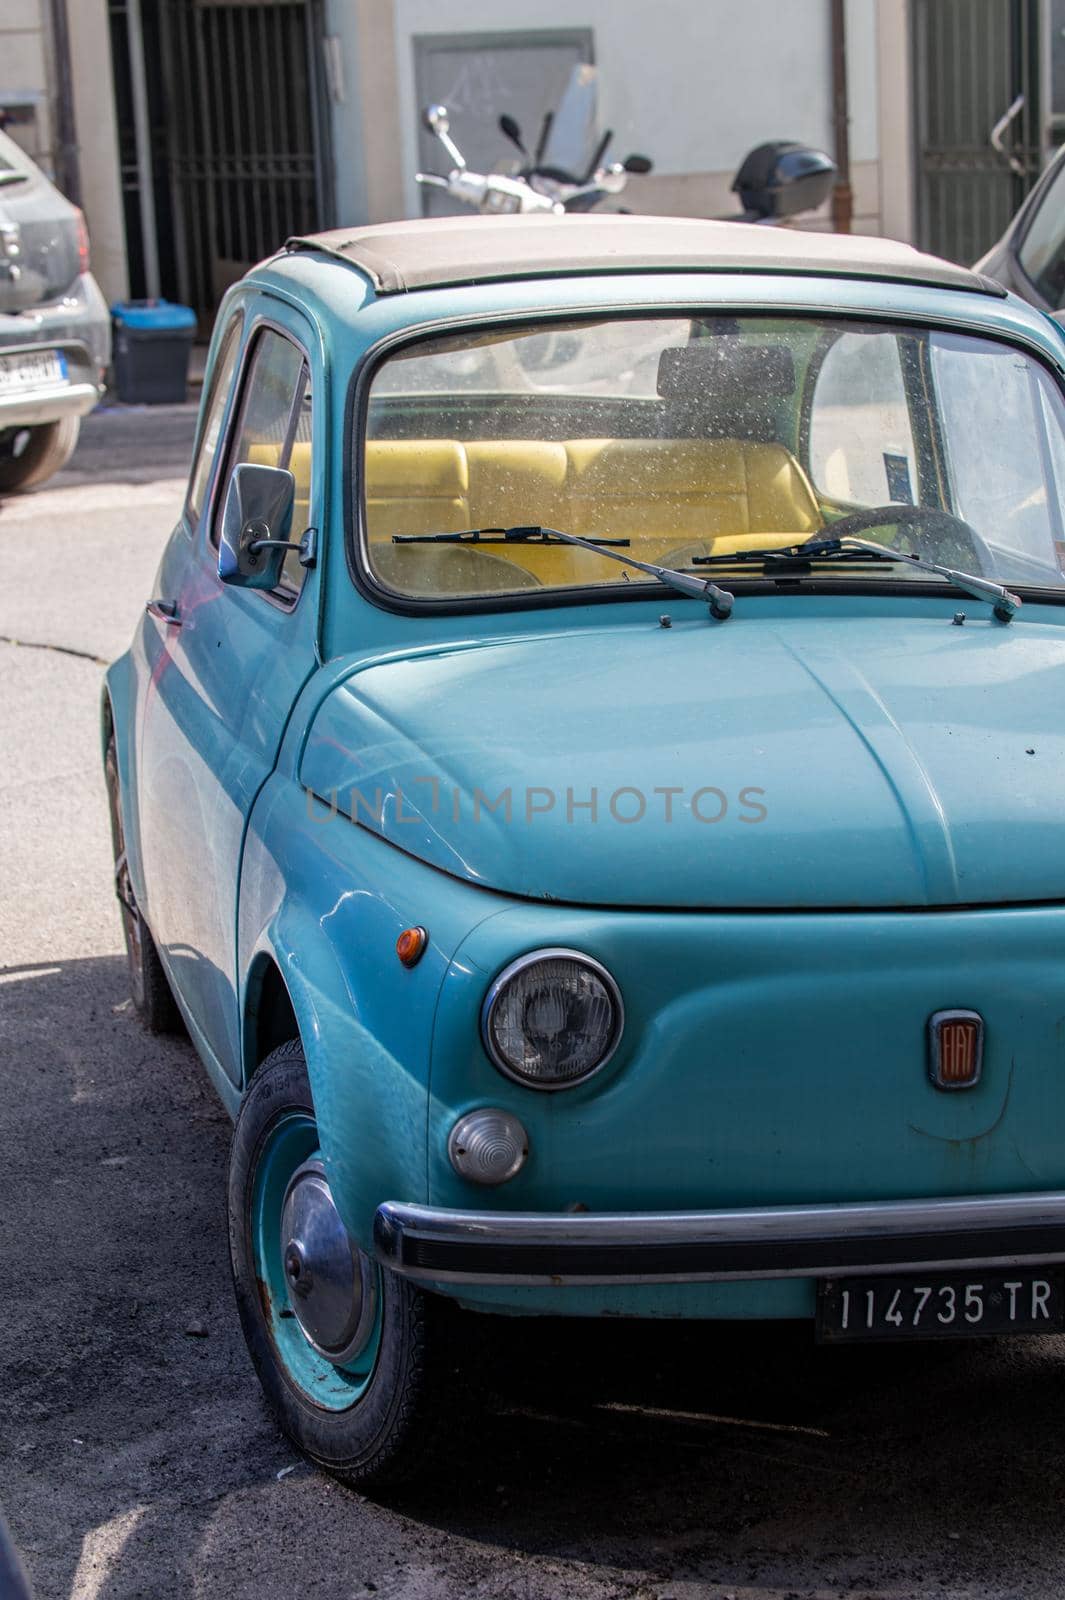 vintage fiat 500 from years ago on petrol by carfedeph